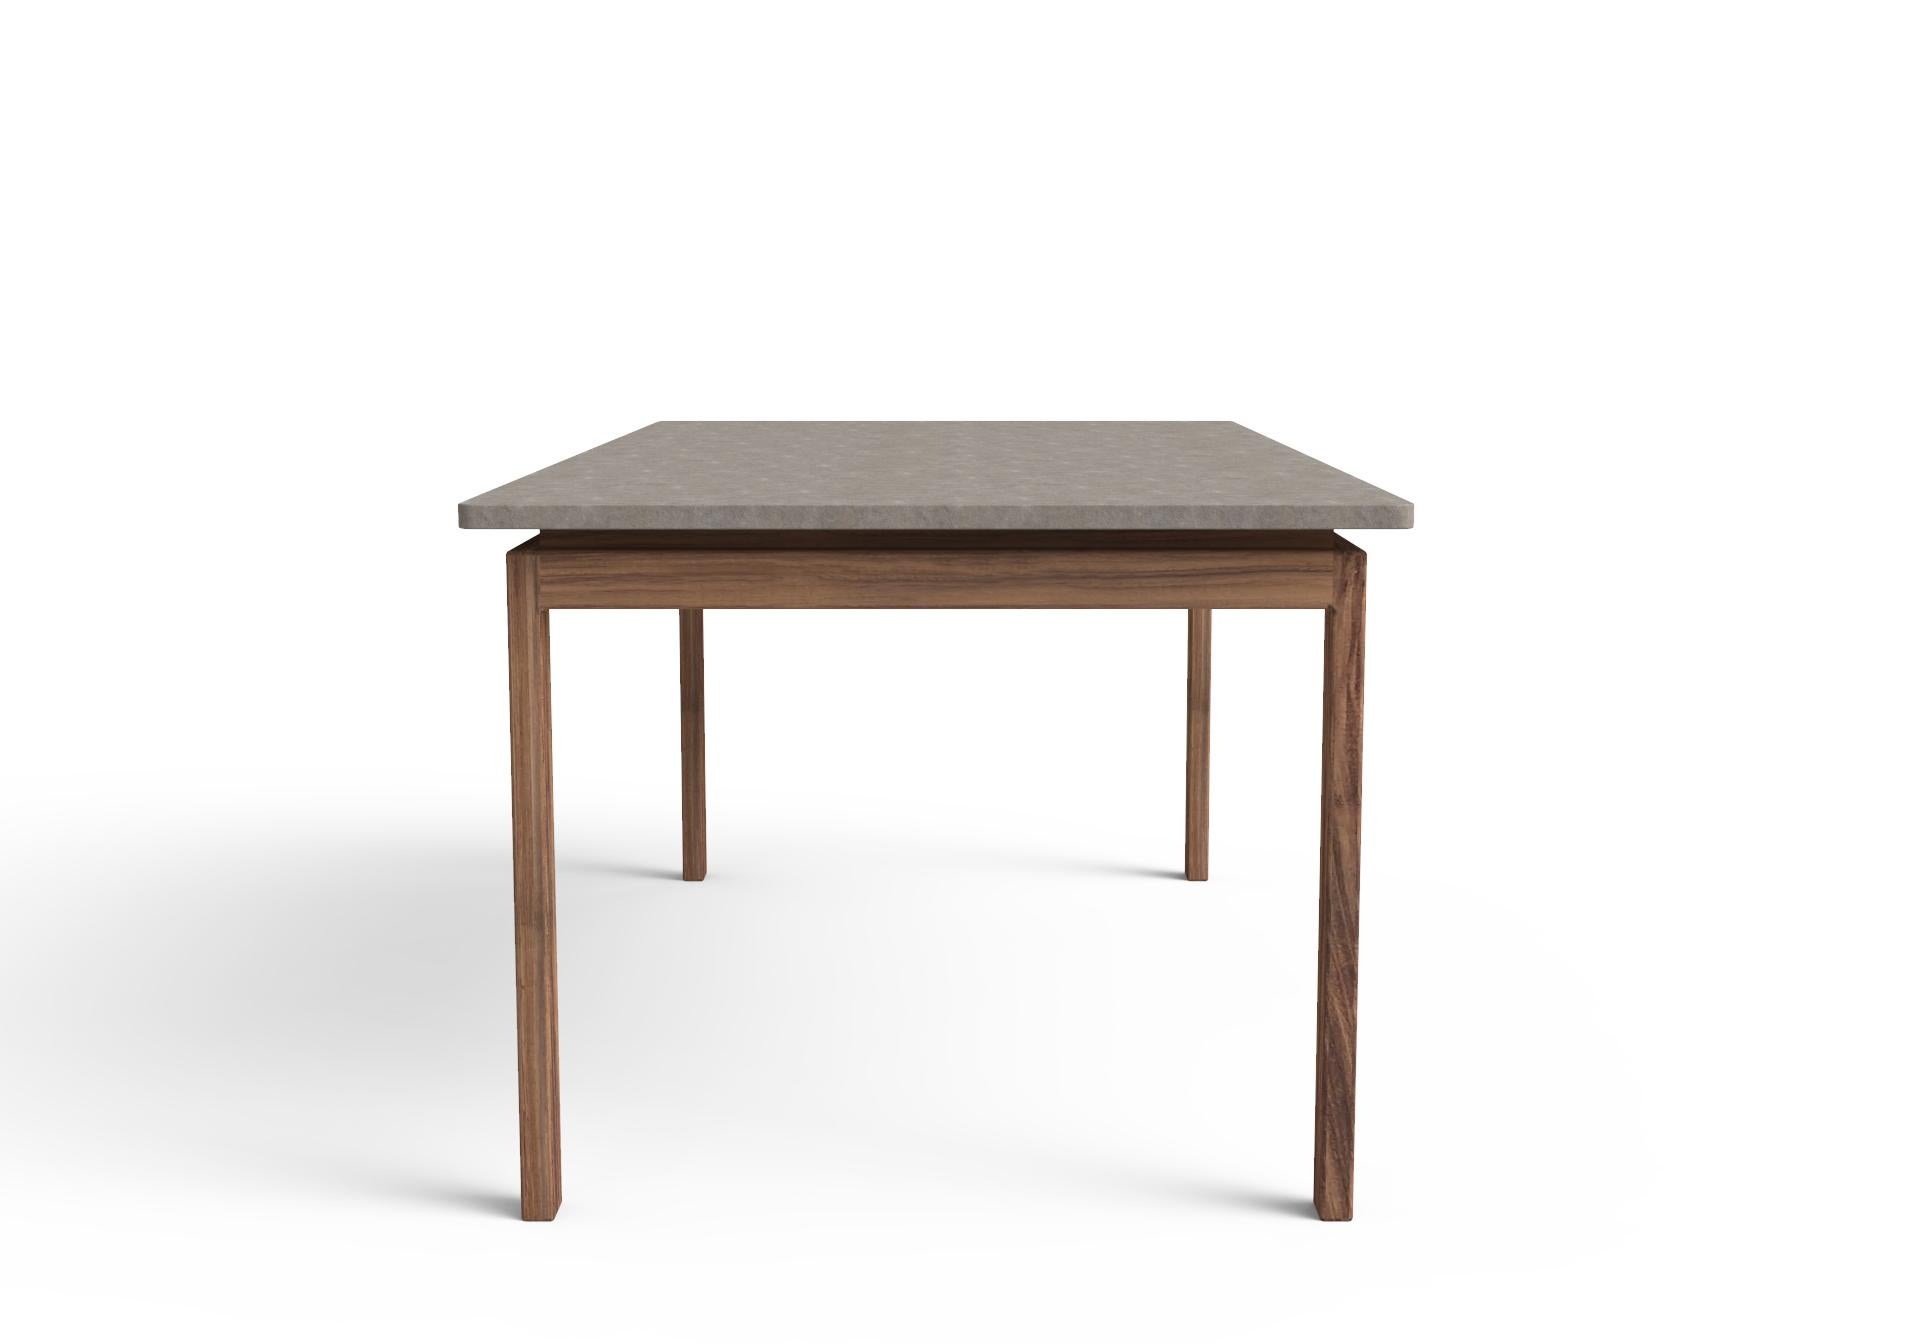 Modern Vieyra Dining Table with Viroc top, Contemporary Mexican Design